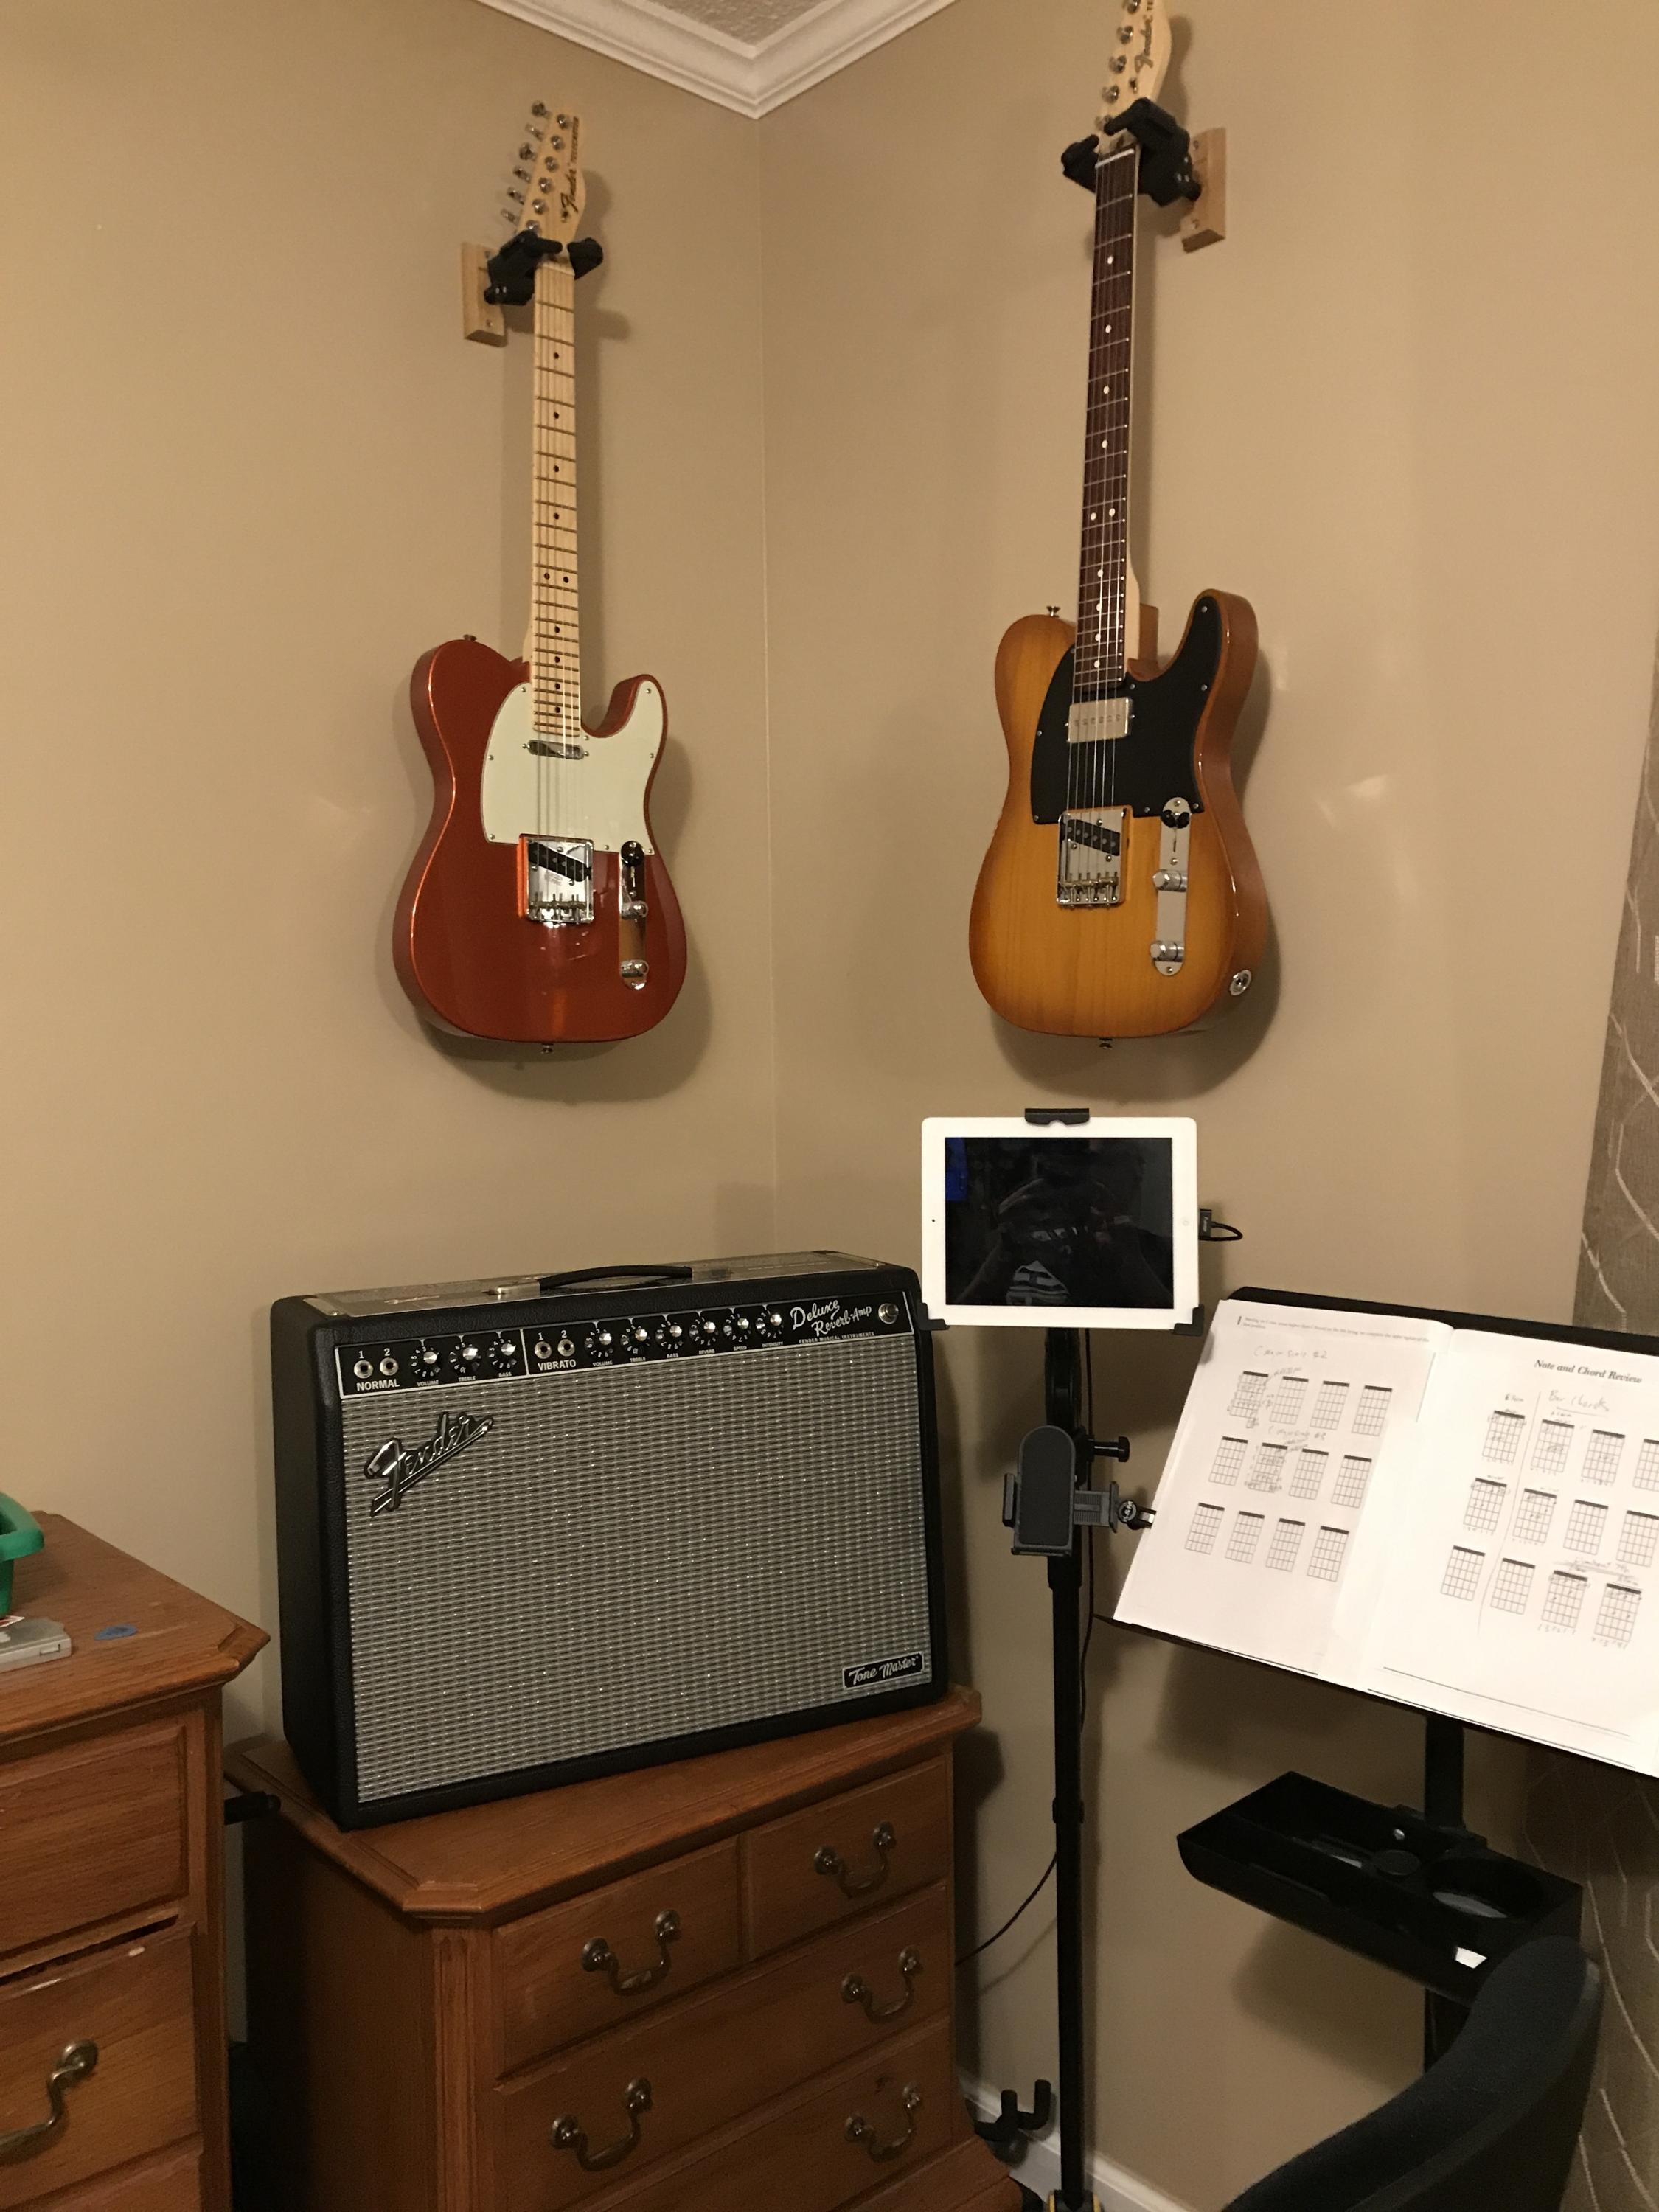 How Many Guitar Amps Do You Own?-20201024_031615814_ios-jpg